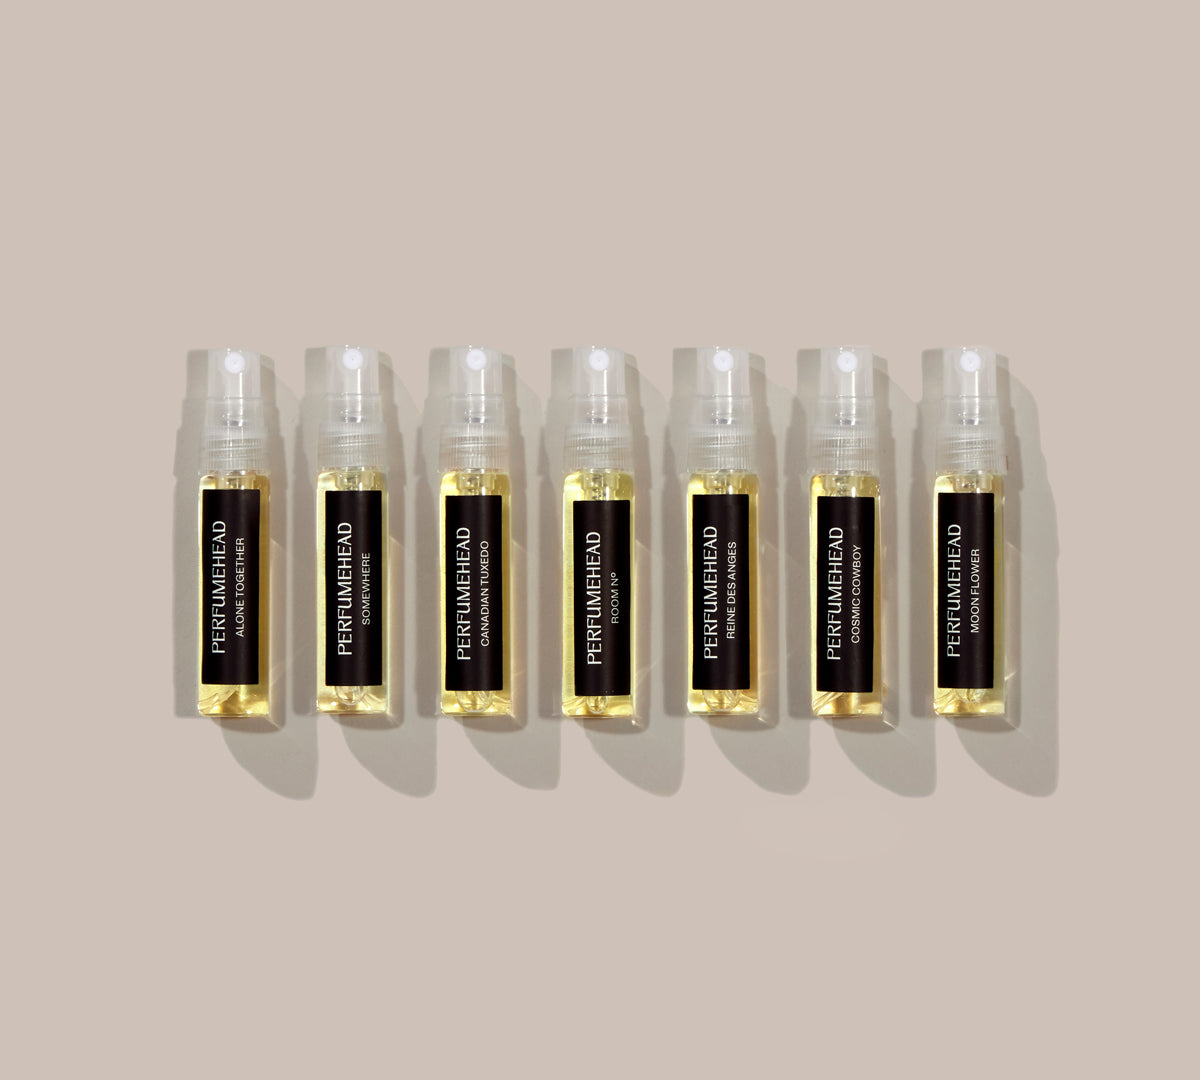 The Los Angeles Osmocosm Discovery Set 7 x 5ml bottles.